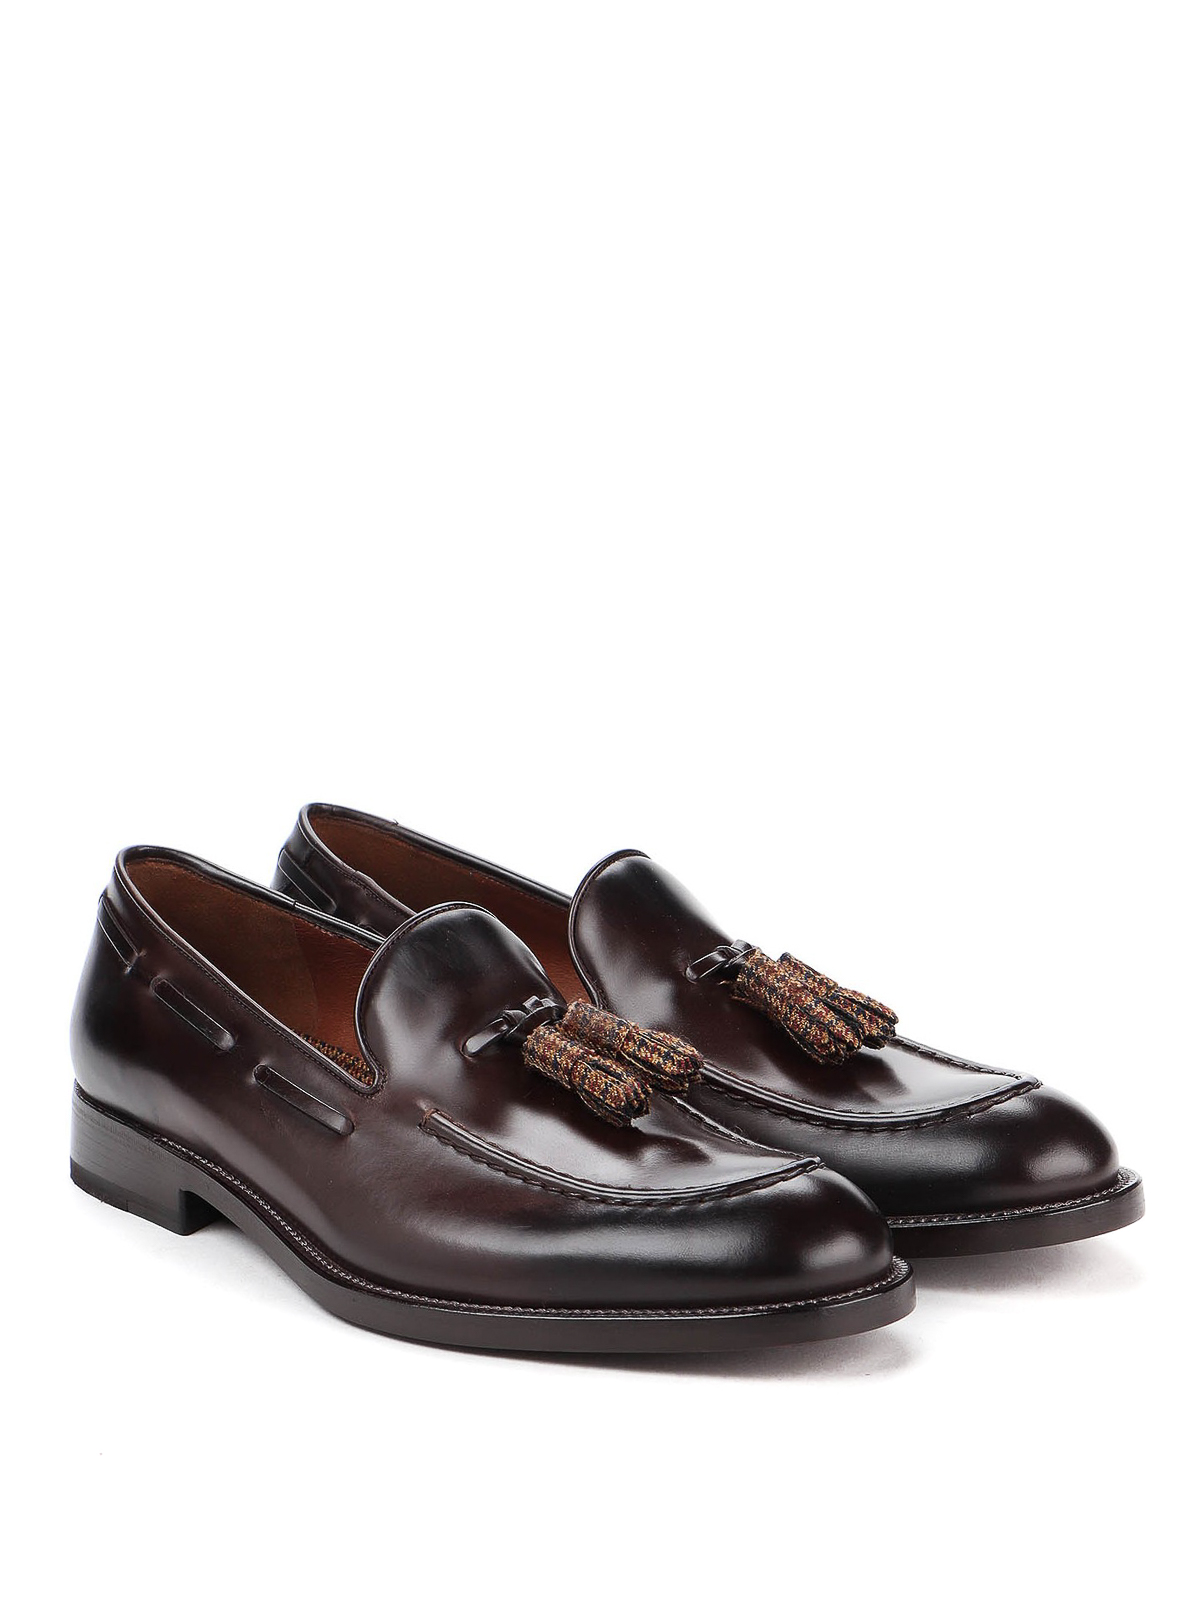 Herhaald Resultaat Toestand Loafers & Slippers Fratelli Rossetti - Brushed leather Brera loafers -  14195PL03921DARK